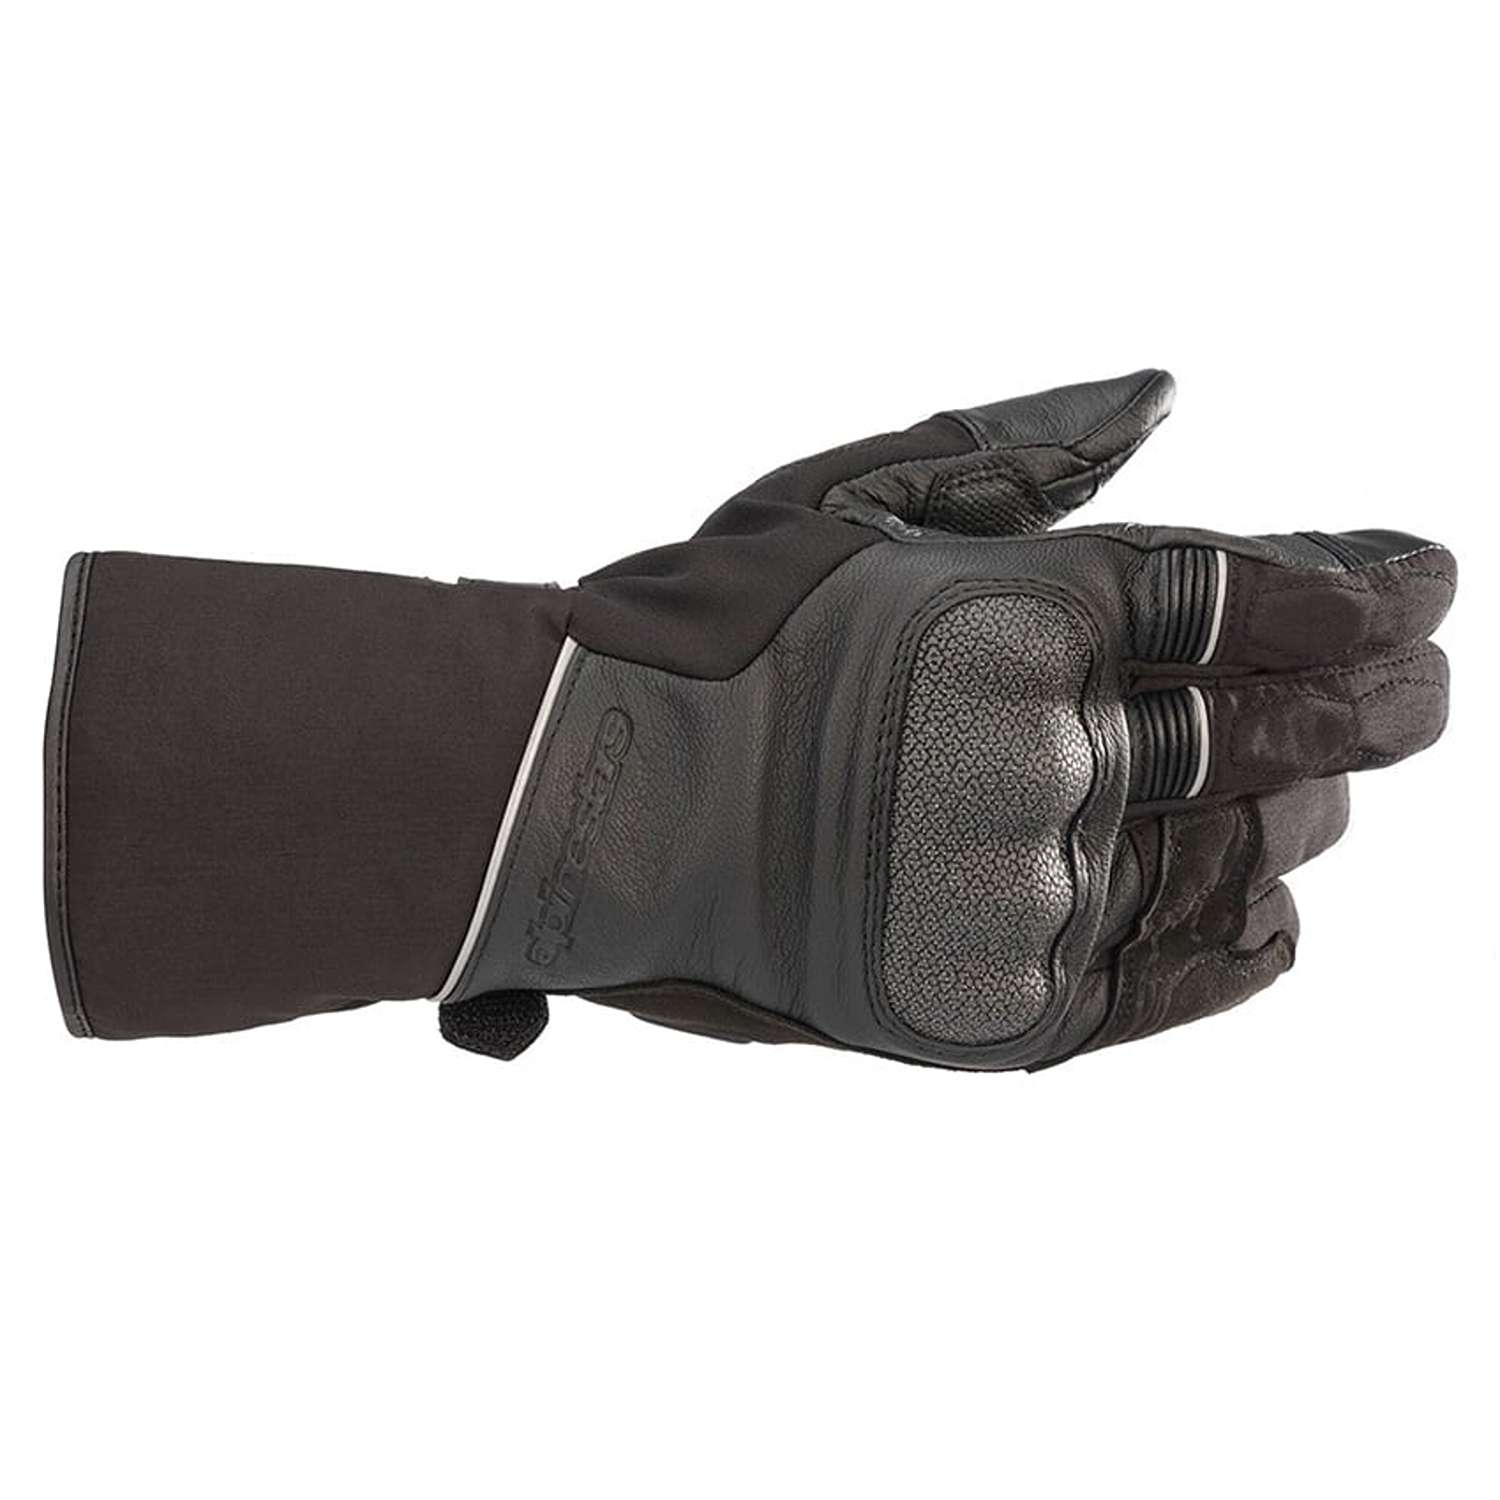 Image of Alpinestars Wr-2 V2 Gore-Tex Gloves With Gore Grip Technology Black Size 3XL ID 8059175098567